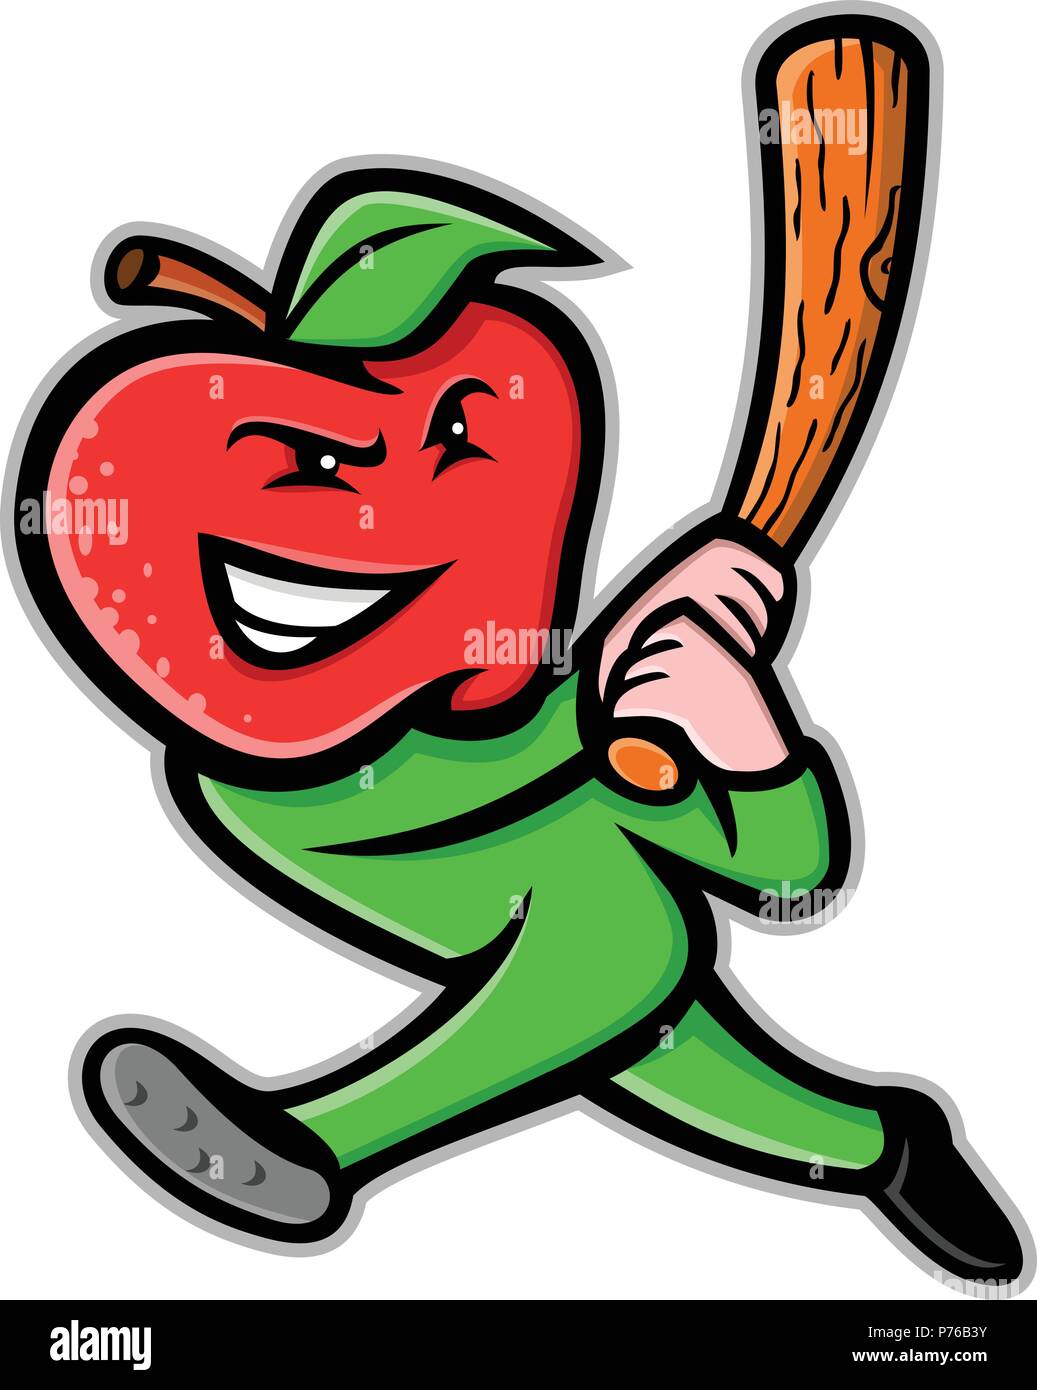 Mascot icon illustration of an apple, a sweet, edible fruit produced by  apple trees, as baseball player batting with baseball bat viewed from side  on Stock Vector Image & Art - Alamy